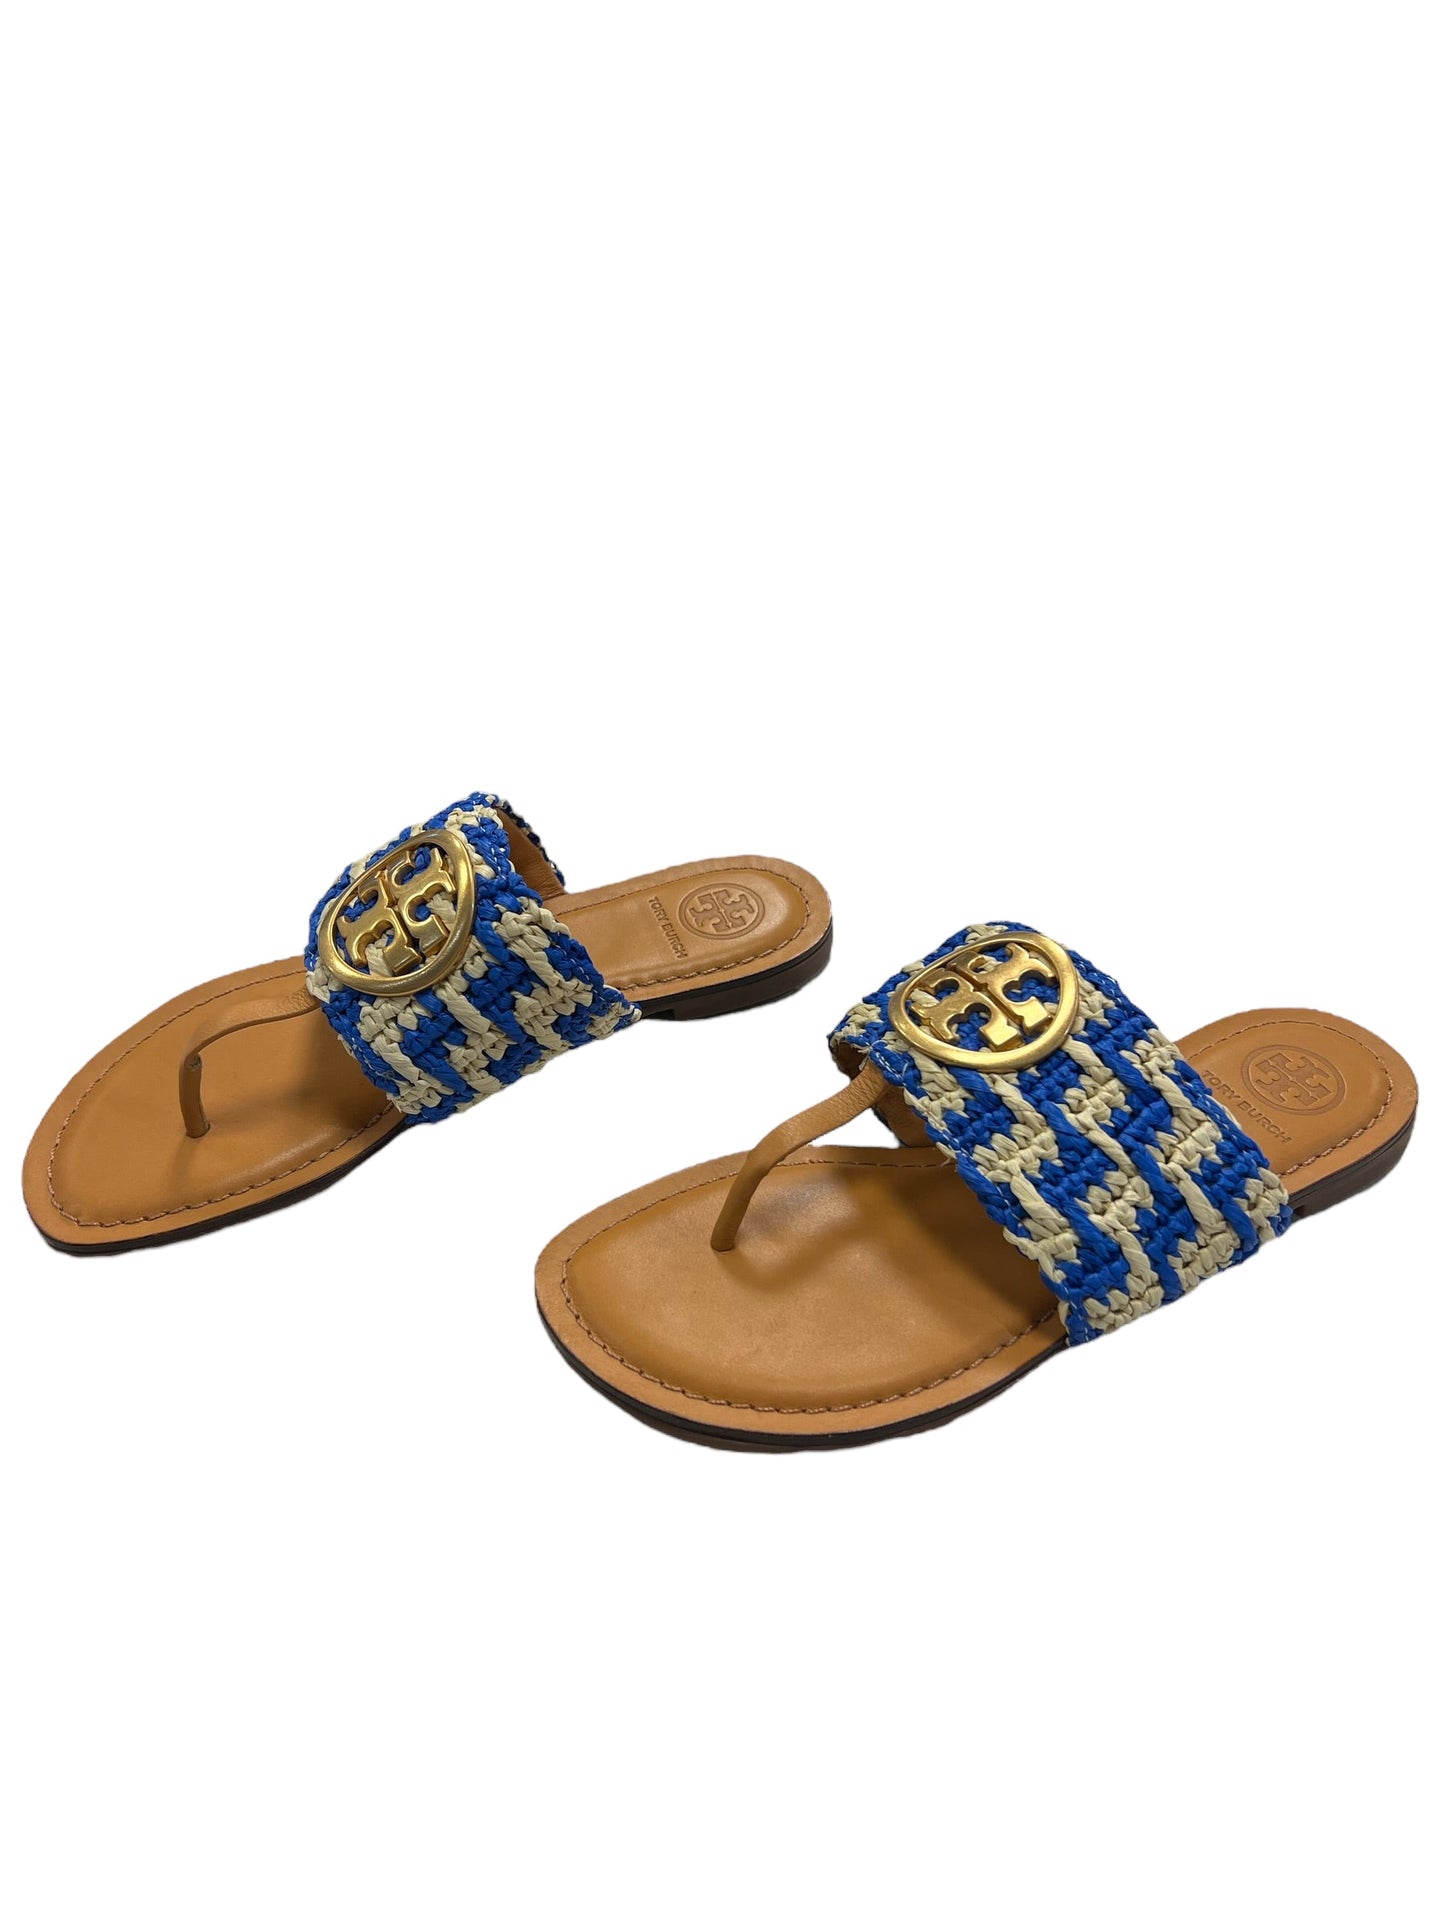 Sandals Designer By Tory Burch  Size: 5.5